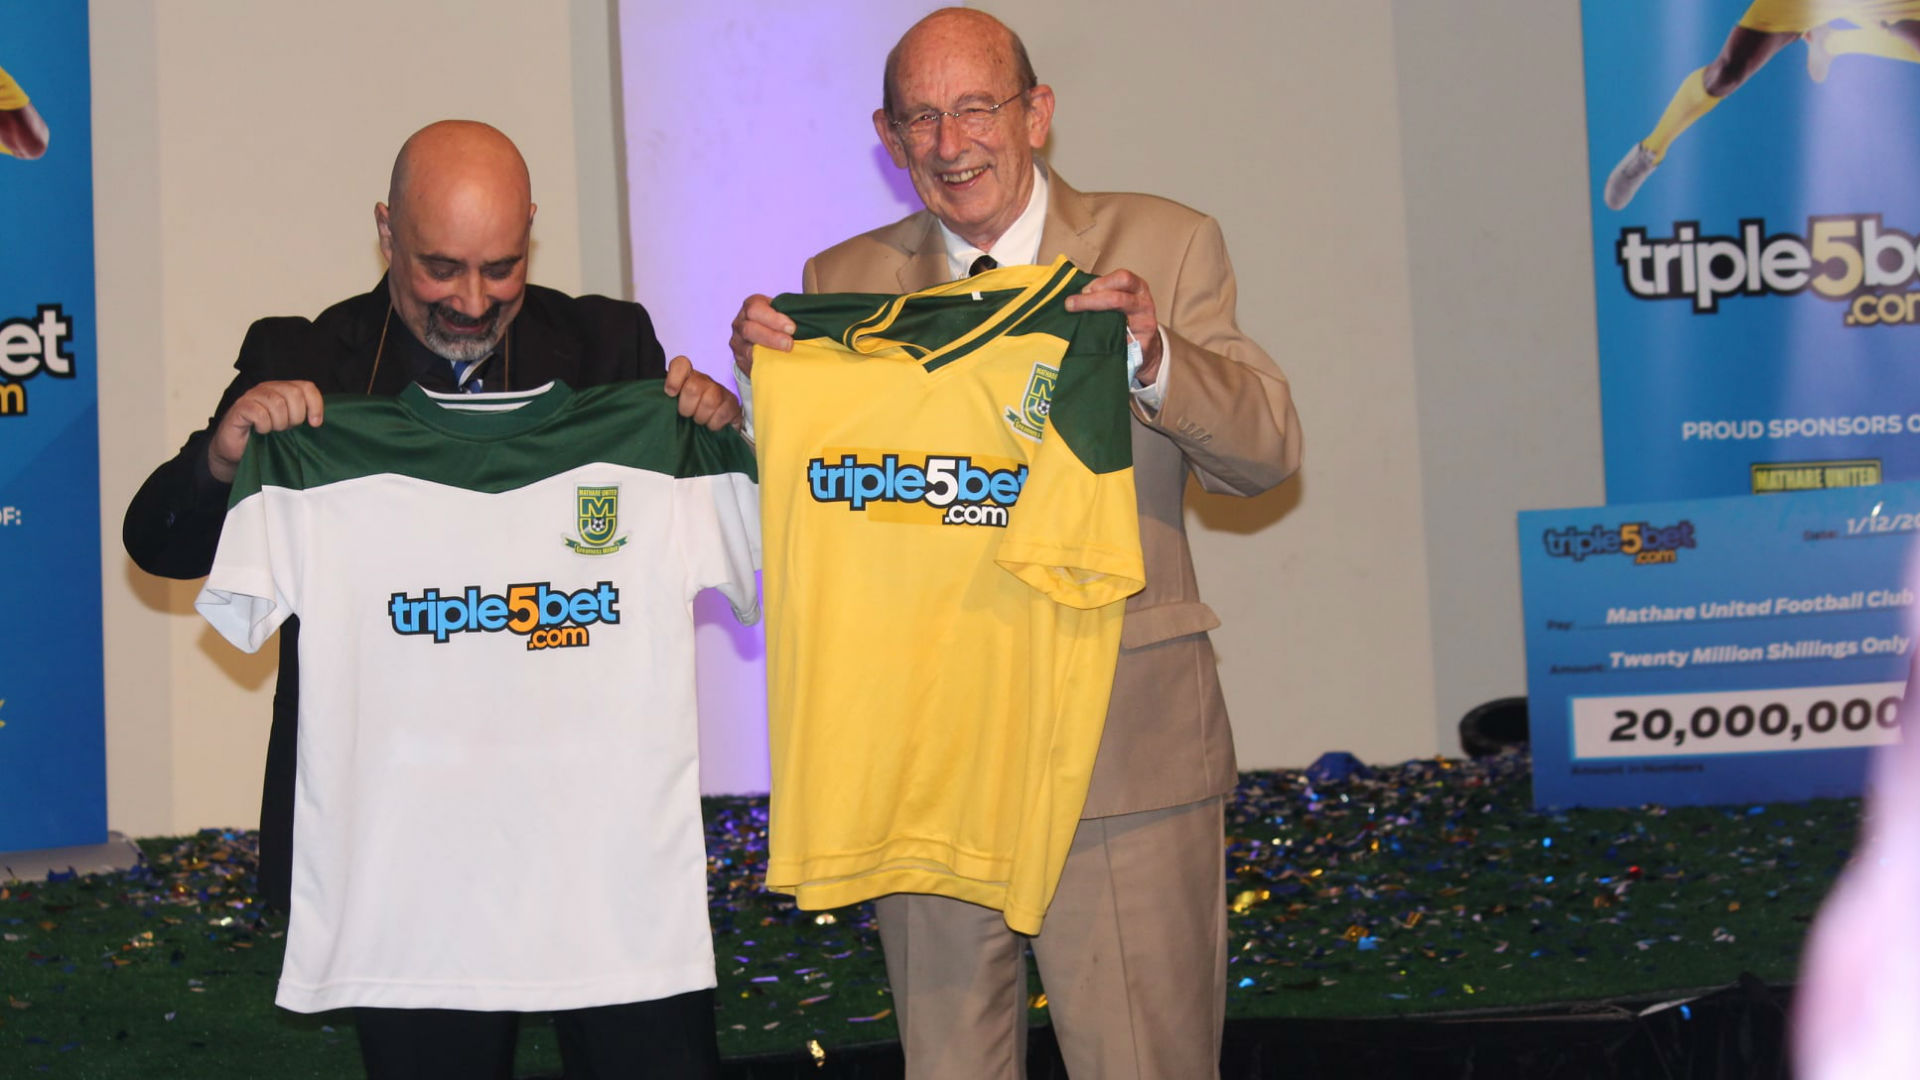 Mathare United Chairman Bob Munro (right) poses with a Triple5 Bet official after the company was unveiled as Mathare's shirt sponsors for the 2020/21 season on December 1, 2020. Mathare United is among clubs that have refused to endorse FKF's media rights deal with Startimes.